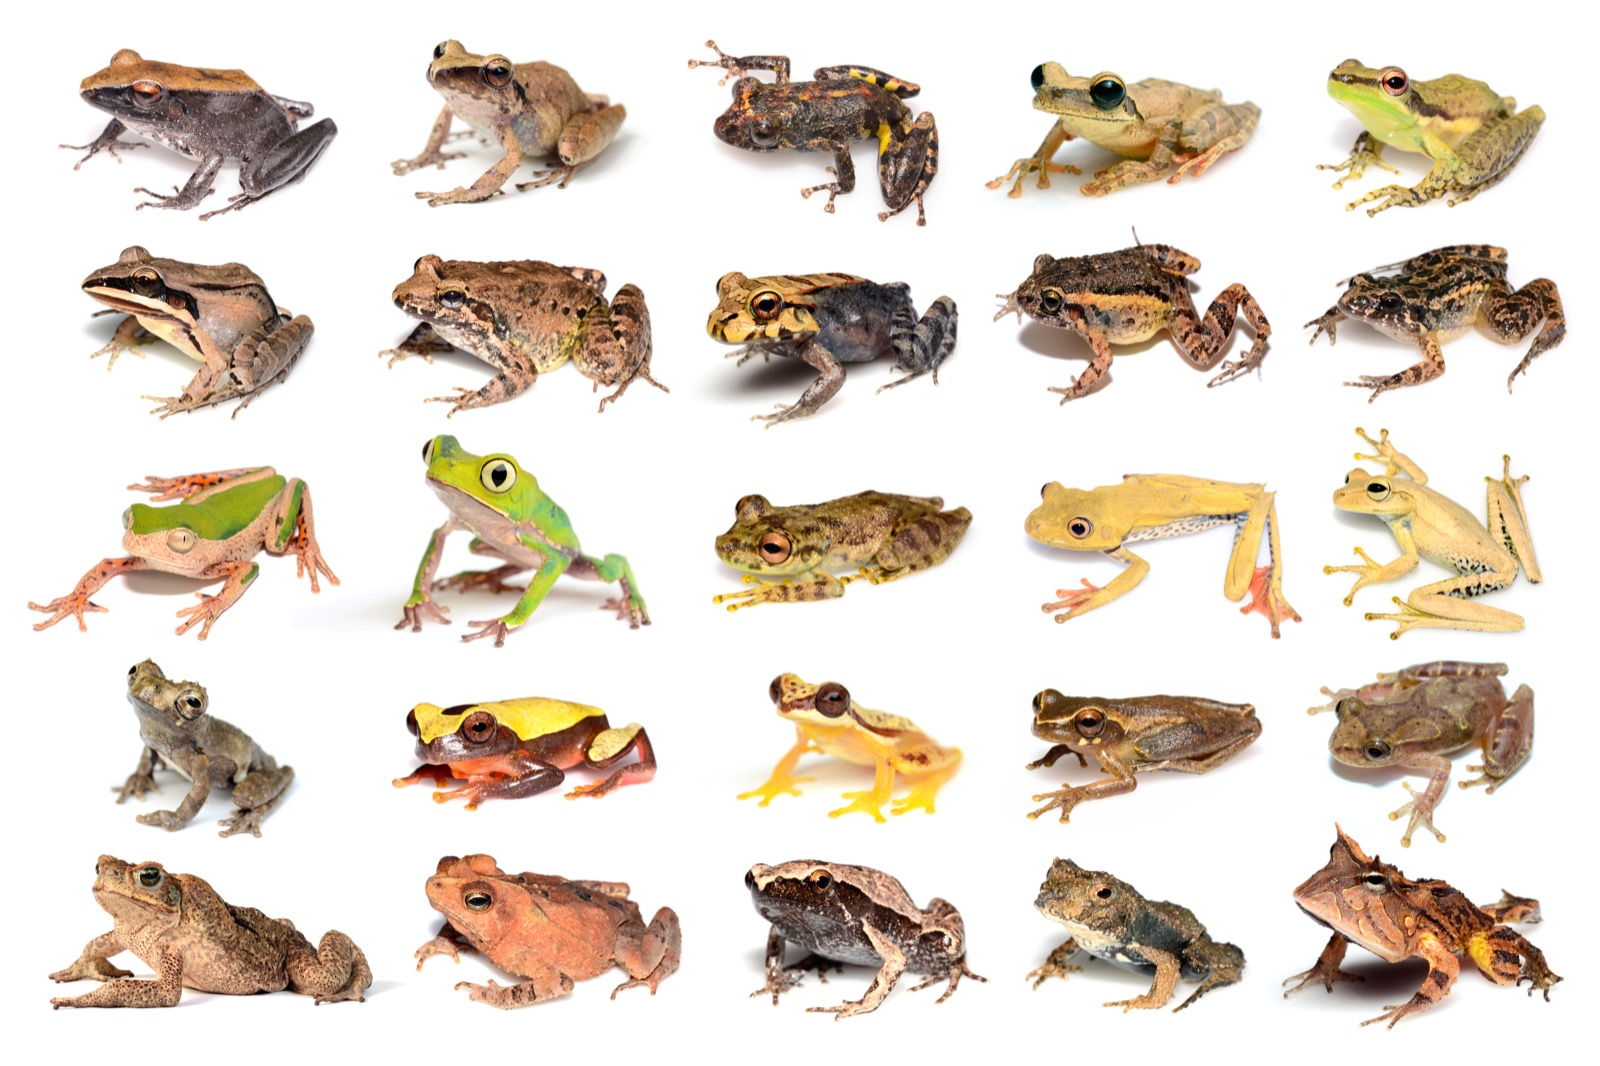 basic information on frogs